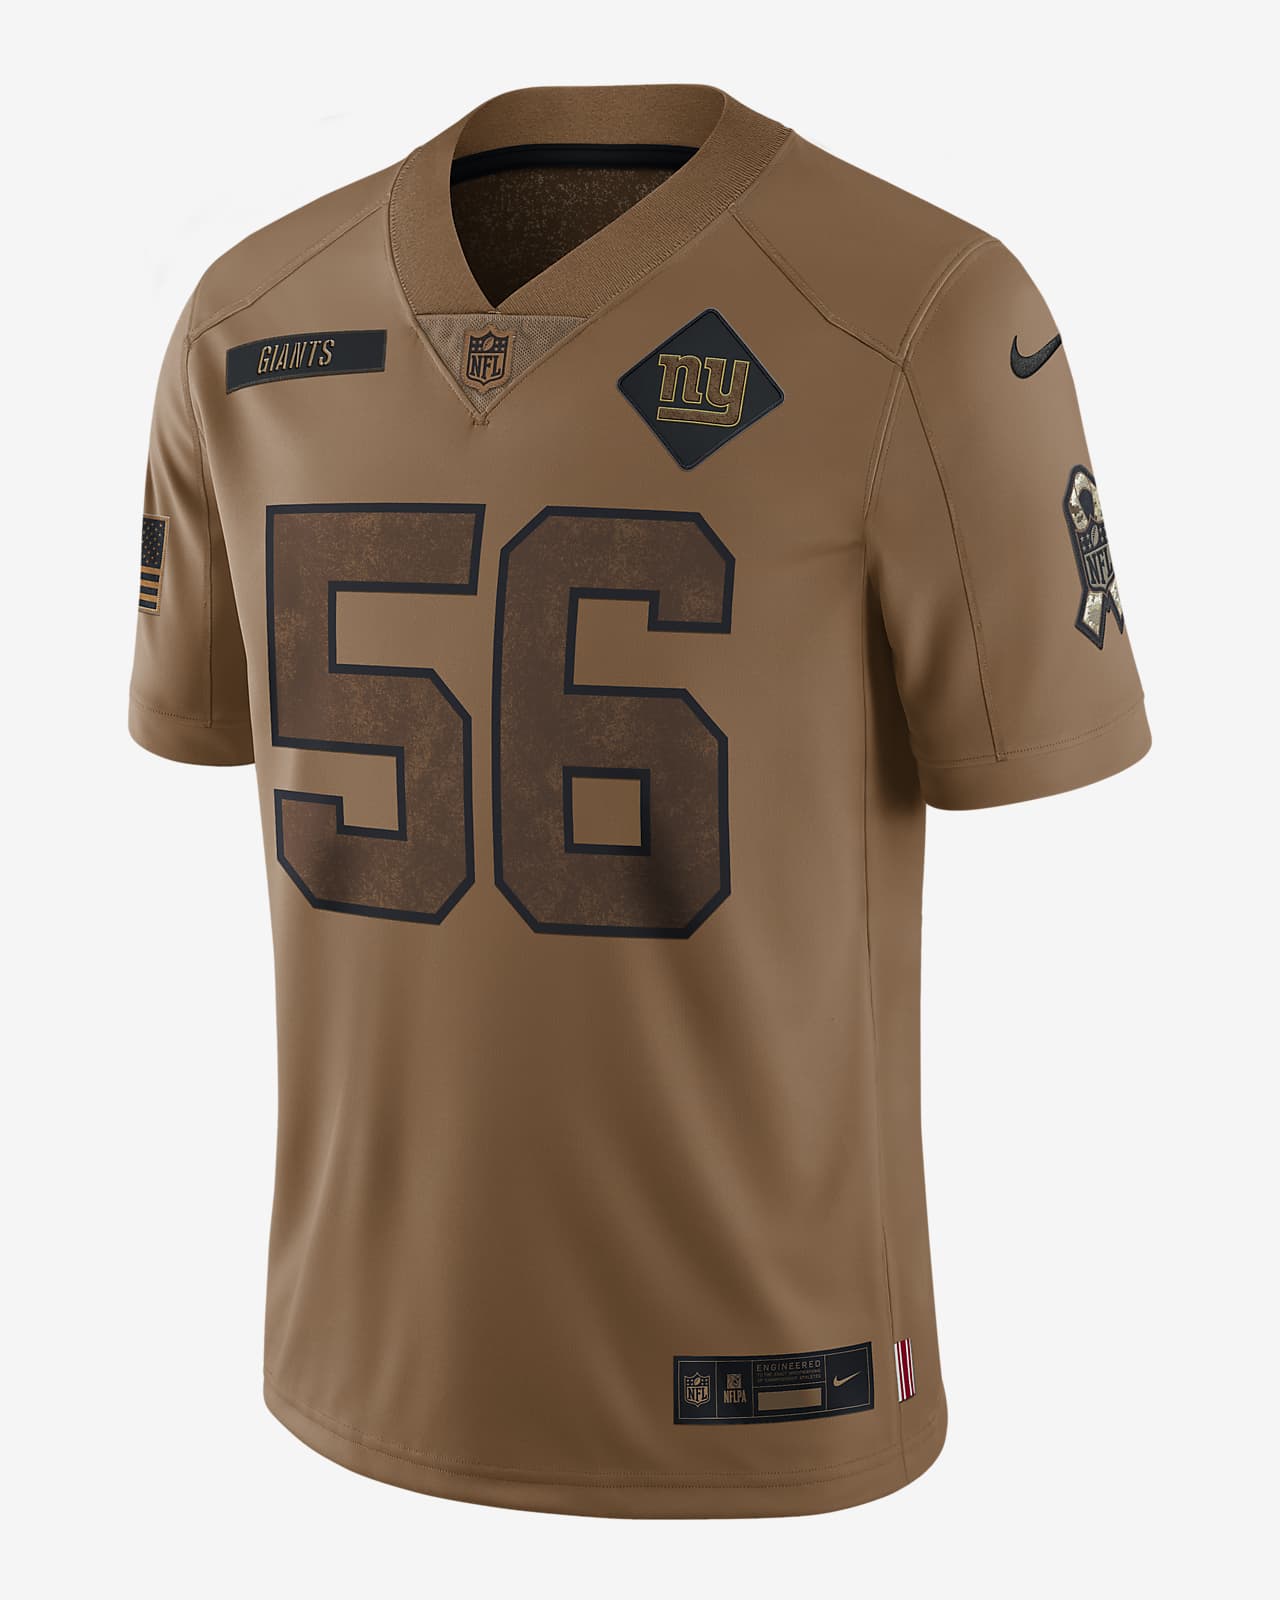 Lawrence Taylor New York Giants Salute to Service Nike Men's Dri-Fit NFL Limited Jersey in Brown, Size: Small | 01AV2EAA6B-EZG